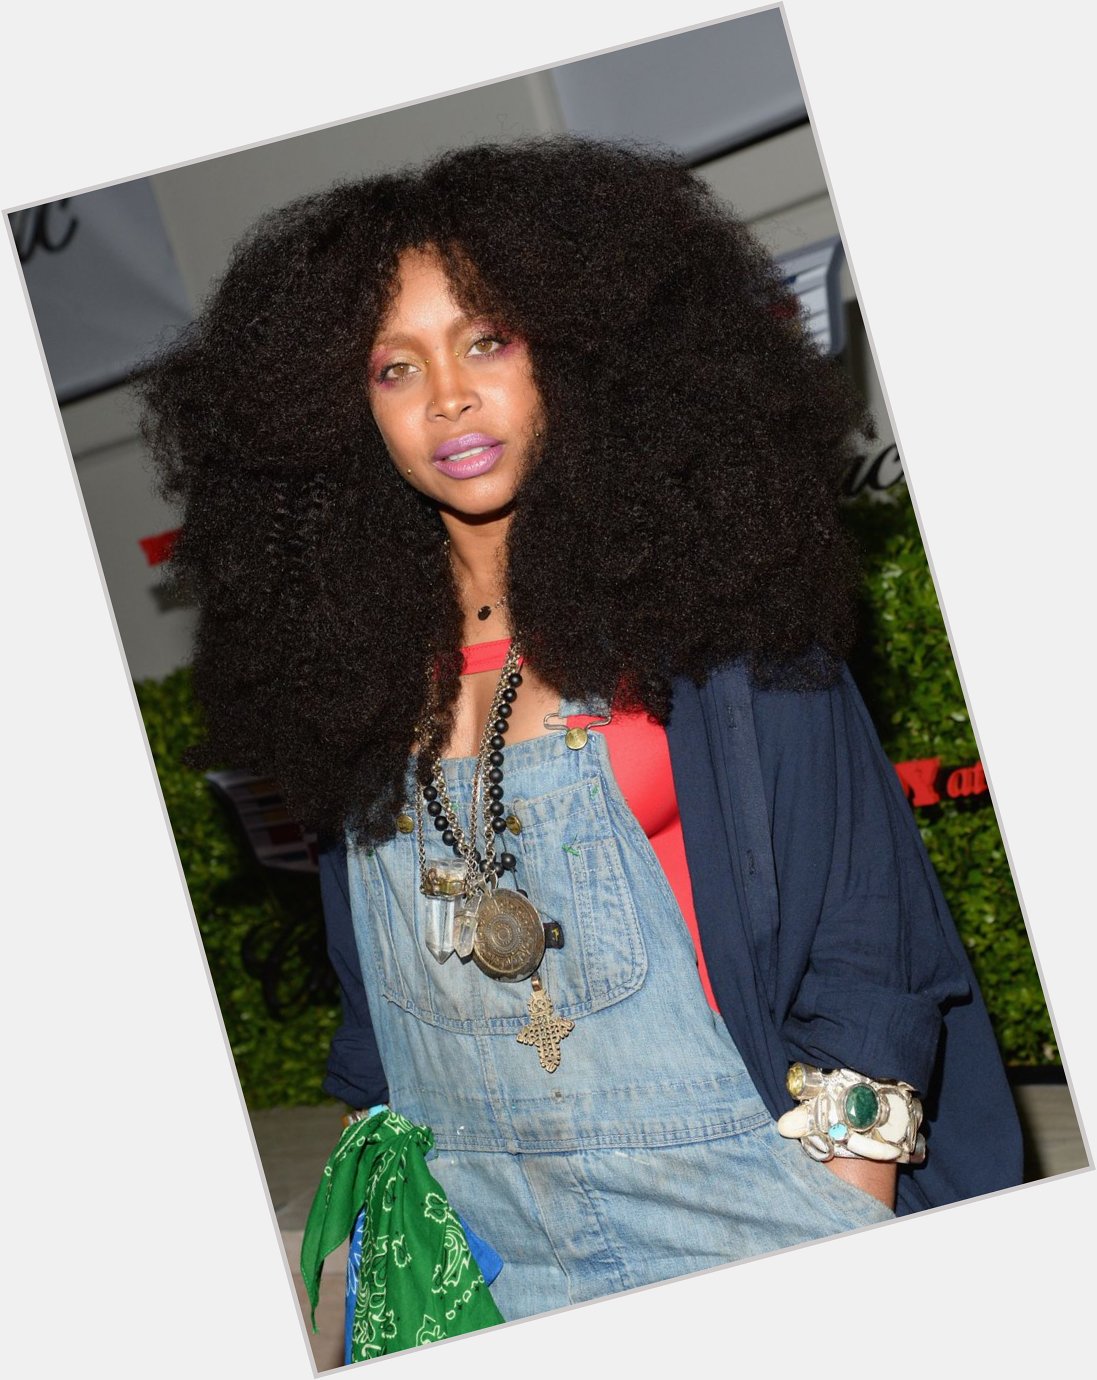  Happy Birthday to Erykah Badu who is 48 years old today!!! 